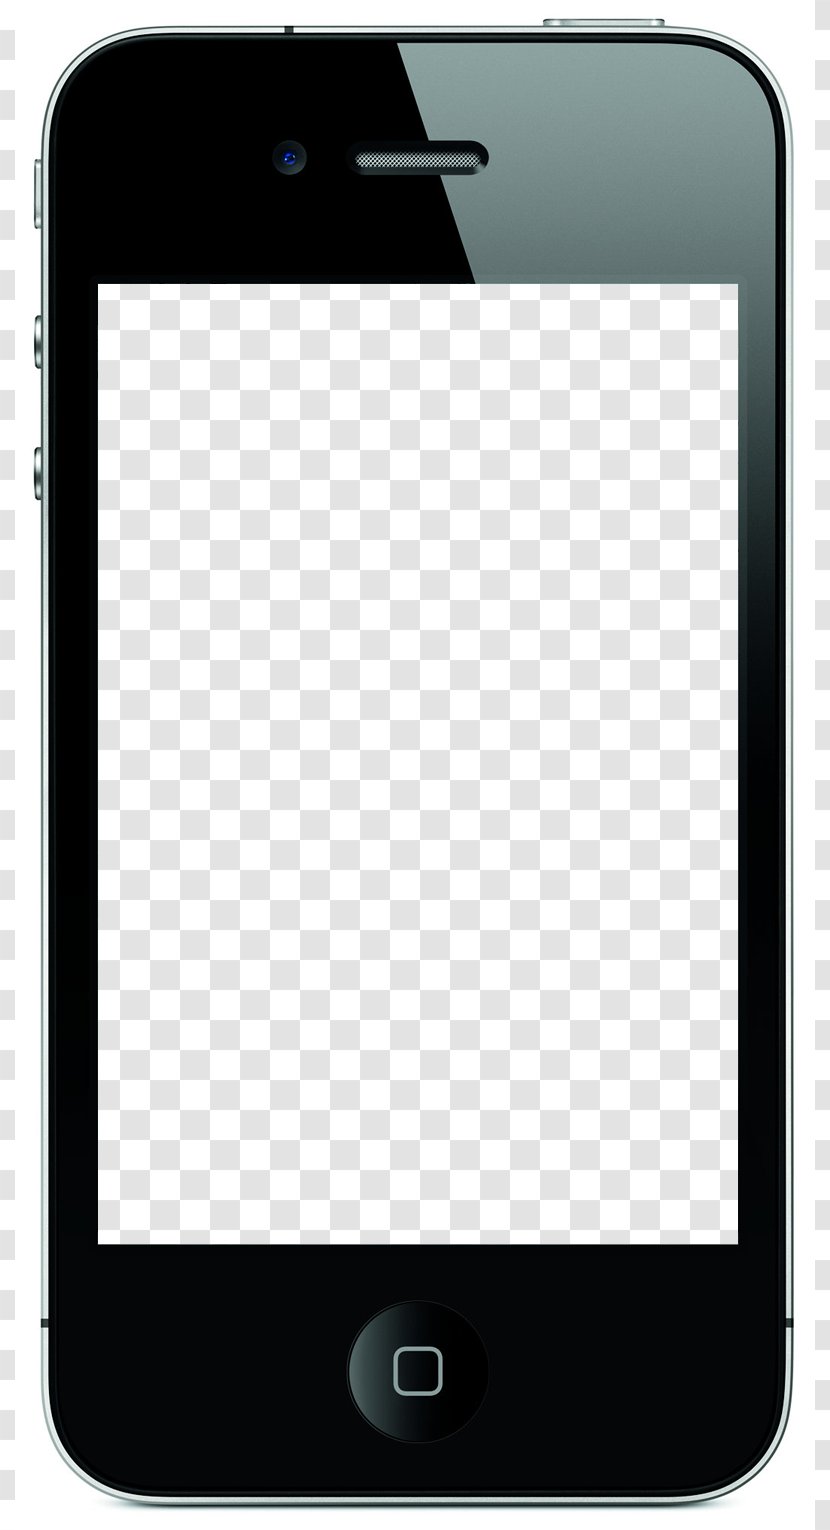 IPhone 4S 5 Responsive Web Design Template - Feature Phone - Iphone Background Transparent PNG